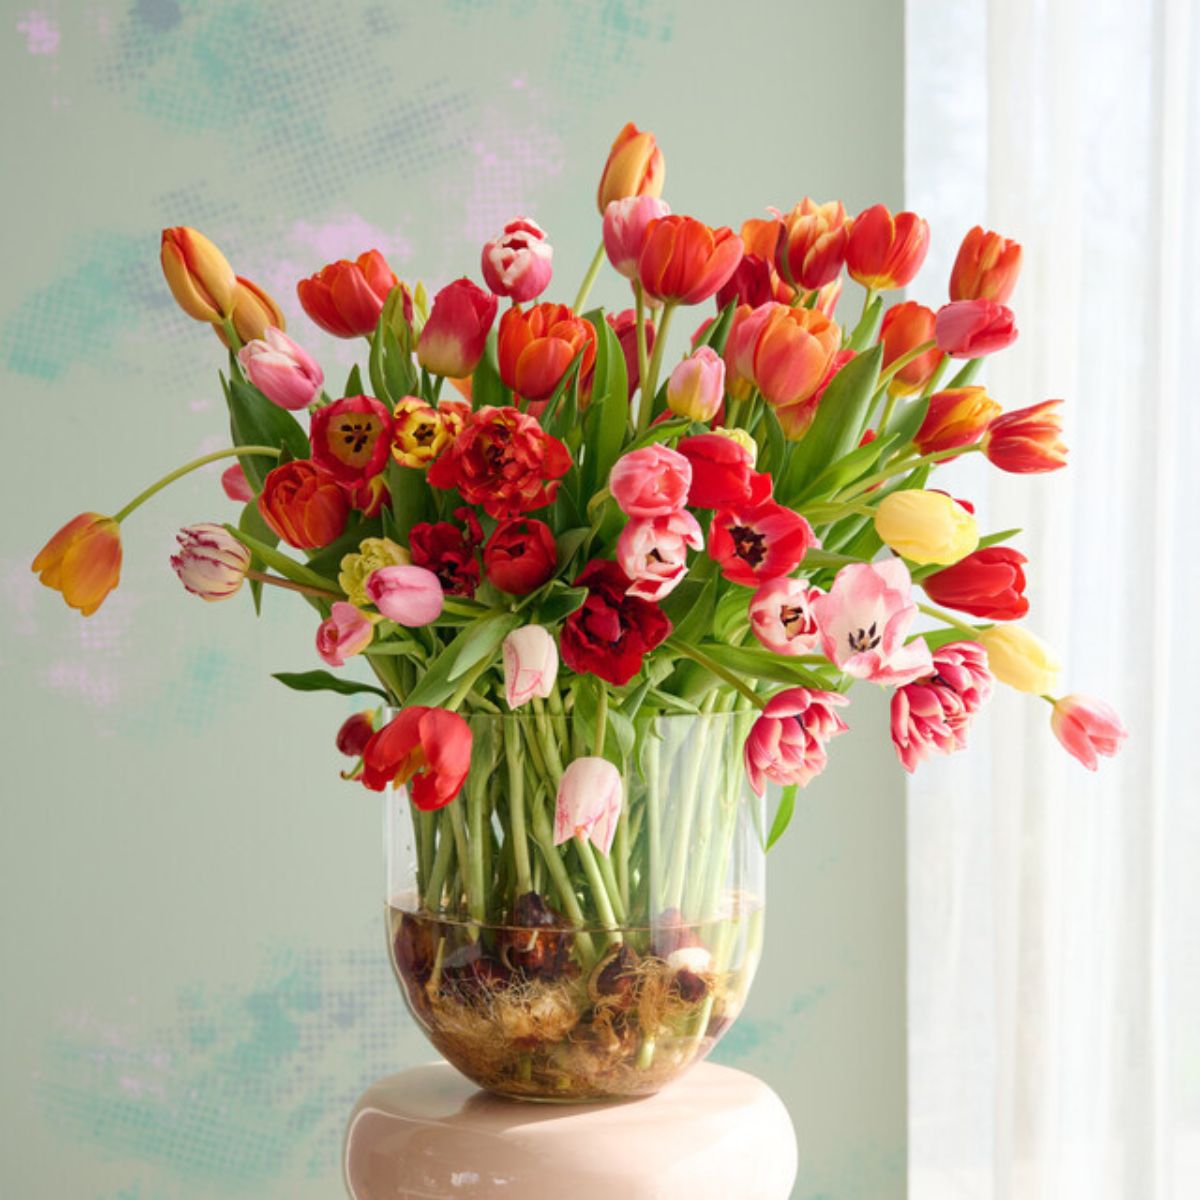 Colorful tulips for Valentines Day by Kapiteyn